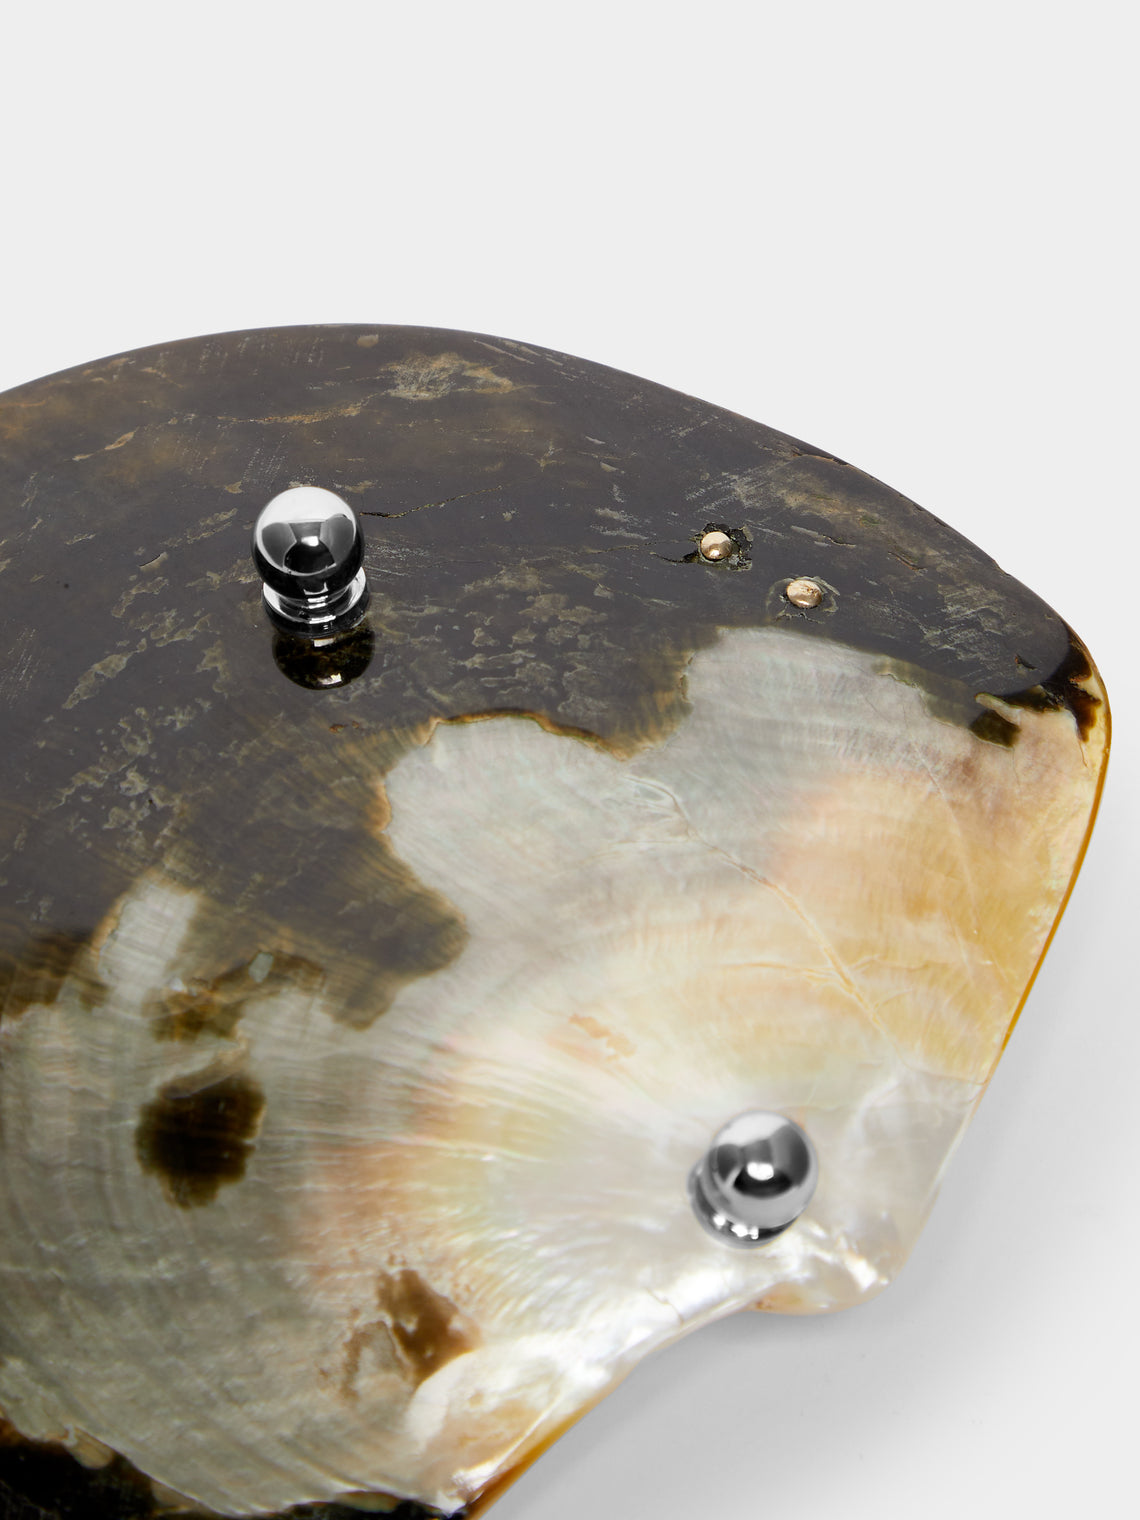 Objet Luxe - Silver-Plated and Black Mother-of-Pearl Plate -  - ABASK